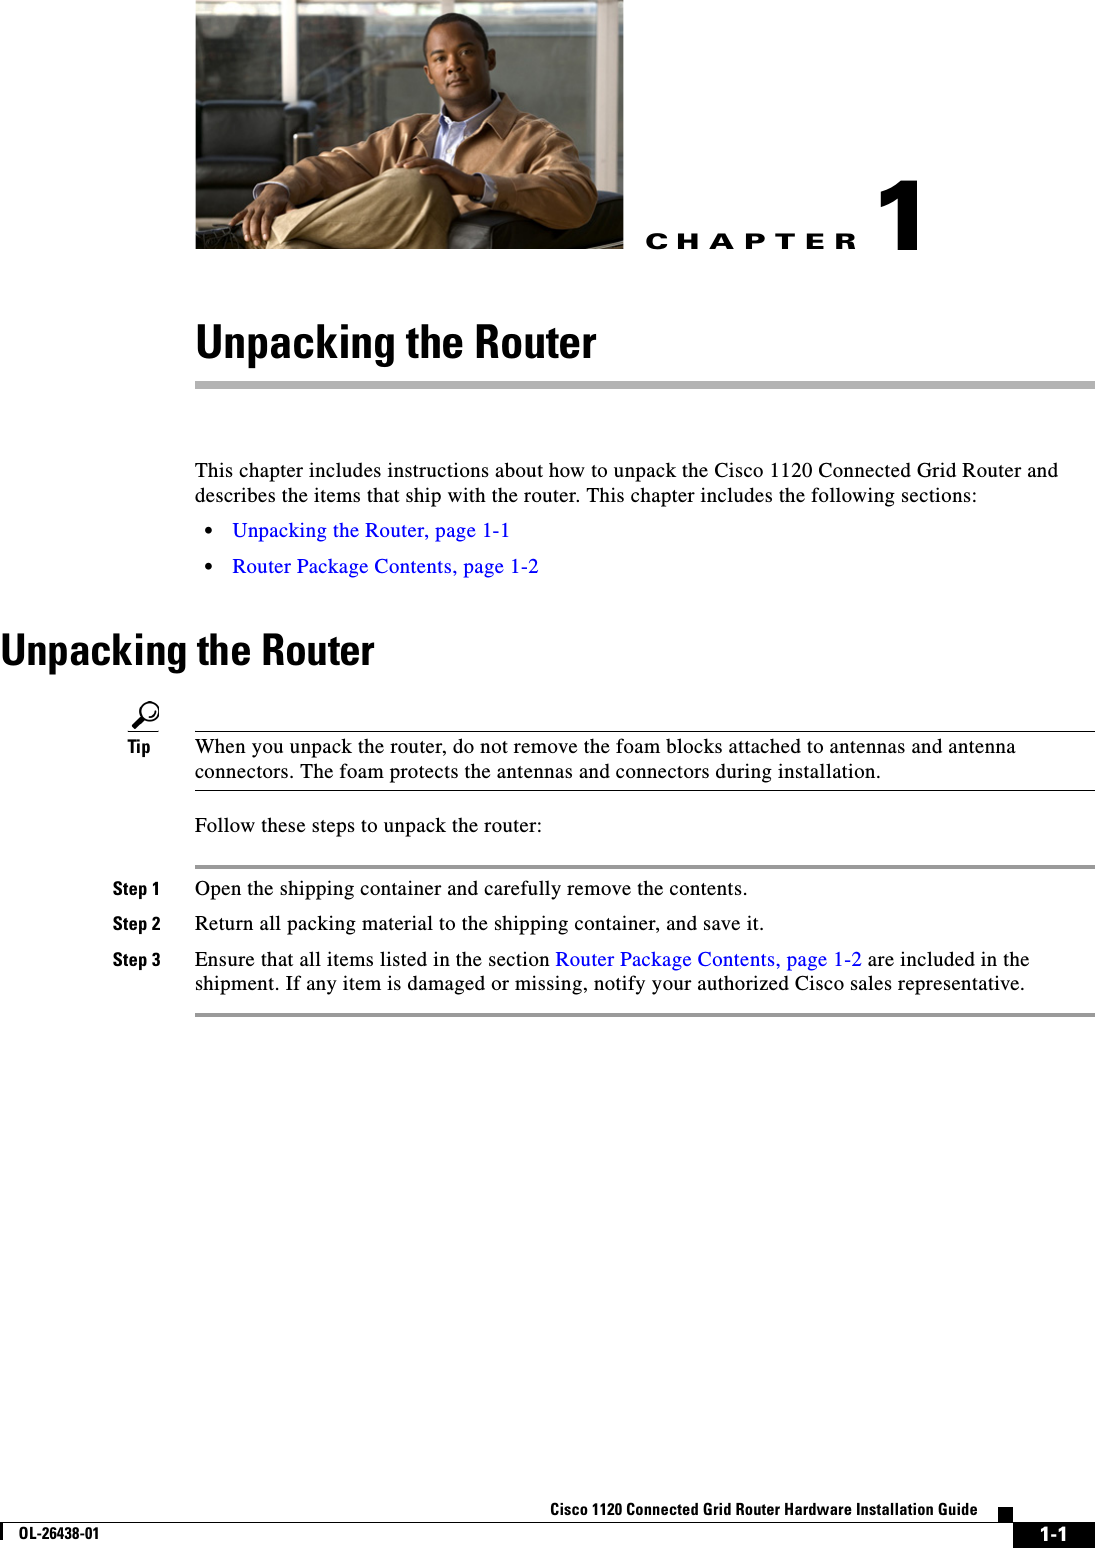 CHAPTER 1-1Cisco 1120 Connected Grid Router Hardware Installation GuideOL-26438-011Unpacking the RouterThis chapter includes instructions about how to unpack the Cisco 1120 Connected Grid Router and describes the items that ship with the router. This chapter includes the following sections:•Unpacking the Router, page 1-1•Router Package Contents, page 1-2Unpacking the RouterTip When you unpack the router, do not remove the foam blocks attached to antennas and antenna connectors. The foam protects the antennas and connectors during installation.Follow these steps to unpack the router:Step 1 Open the shipping container and carefully remove the contents.Step 2 Return all packing material to the shipping container, and save it.Step 3 Ensure that all items listed in the section Router Package Contents, page 1-2 are included in the shipment. If any item is damaged or missing, notify your authorized Cisco sales representative.